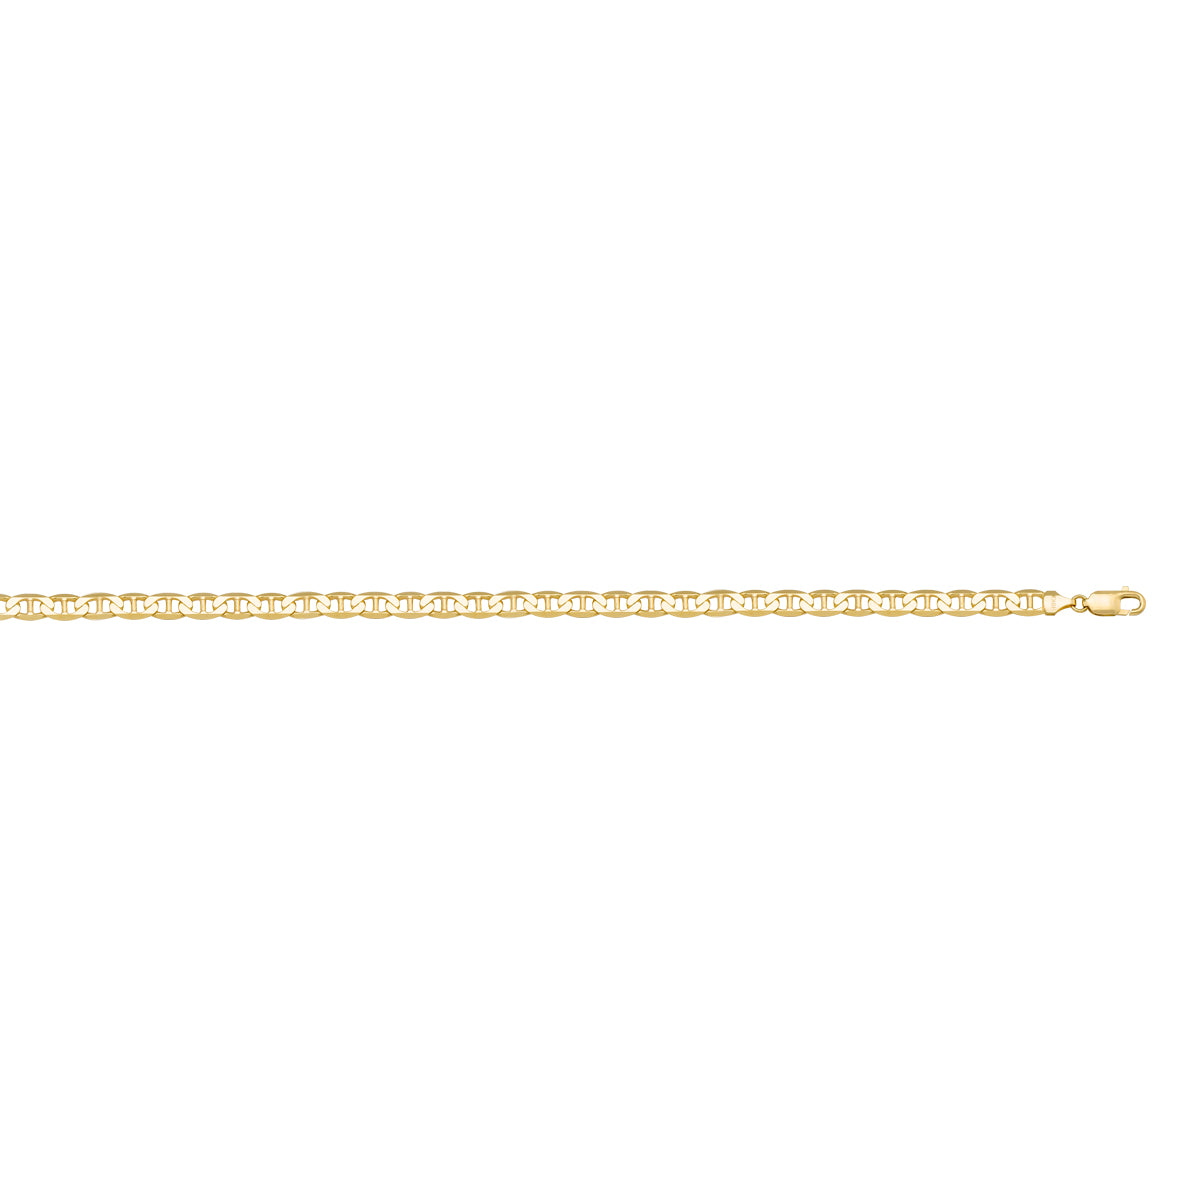 GOLD CHAIN YELLOW GOLD SOLID FLAT ANCHOR LINK 